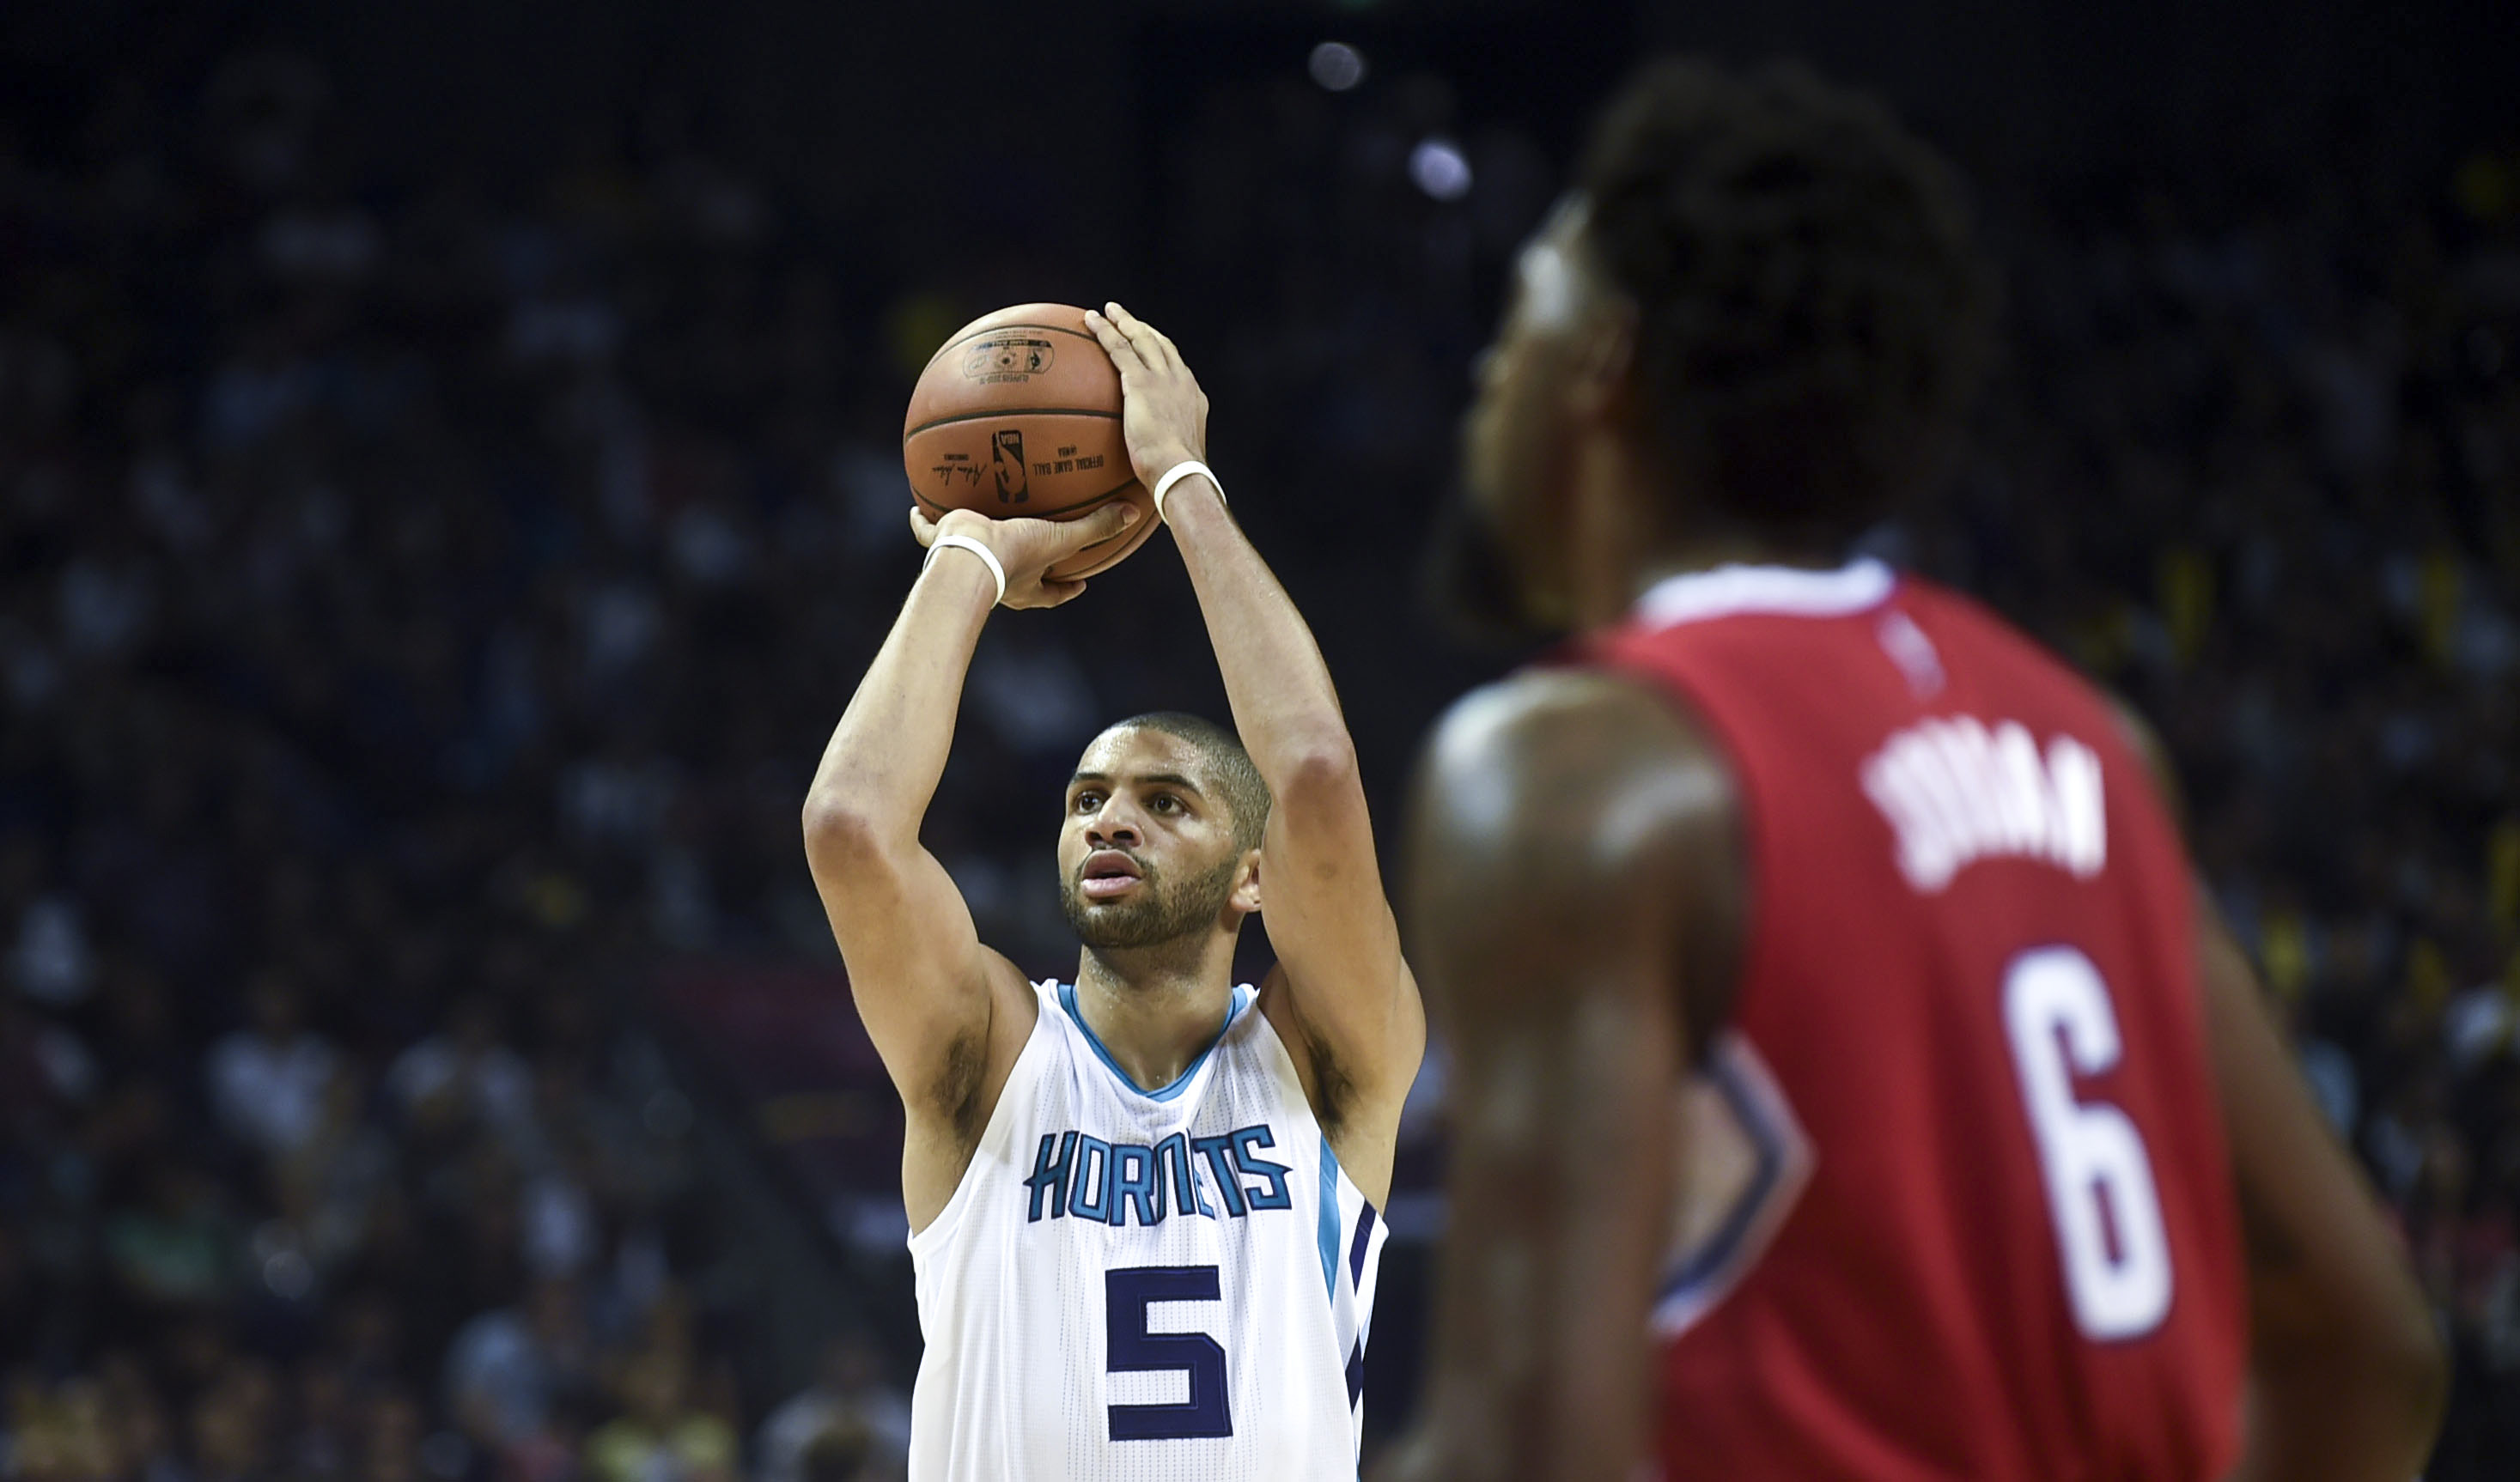 Nicolas Batum Is Getting Paid $25 Million to Average Less Than 4 Points a Game